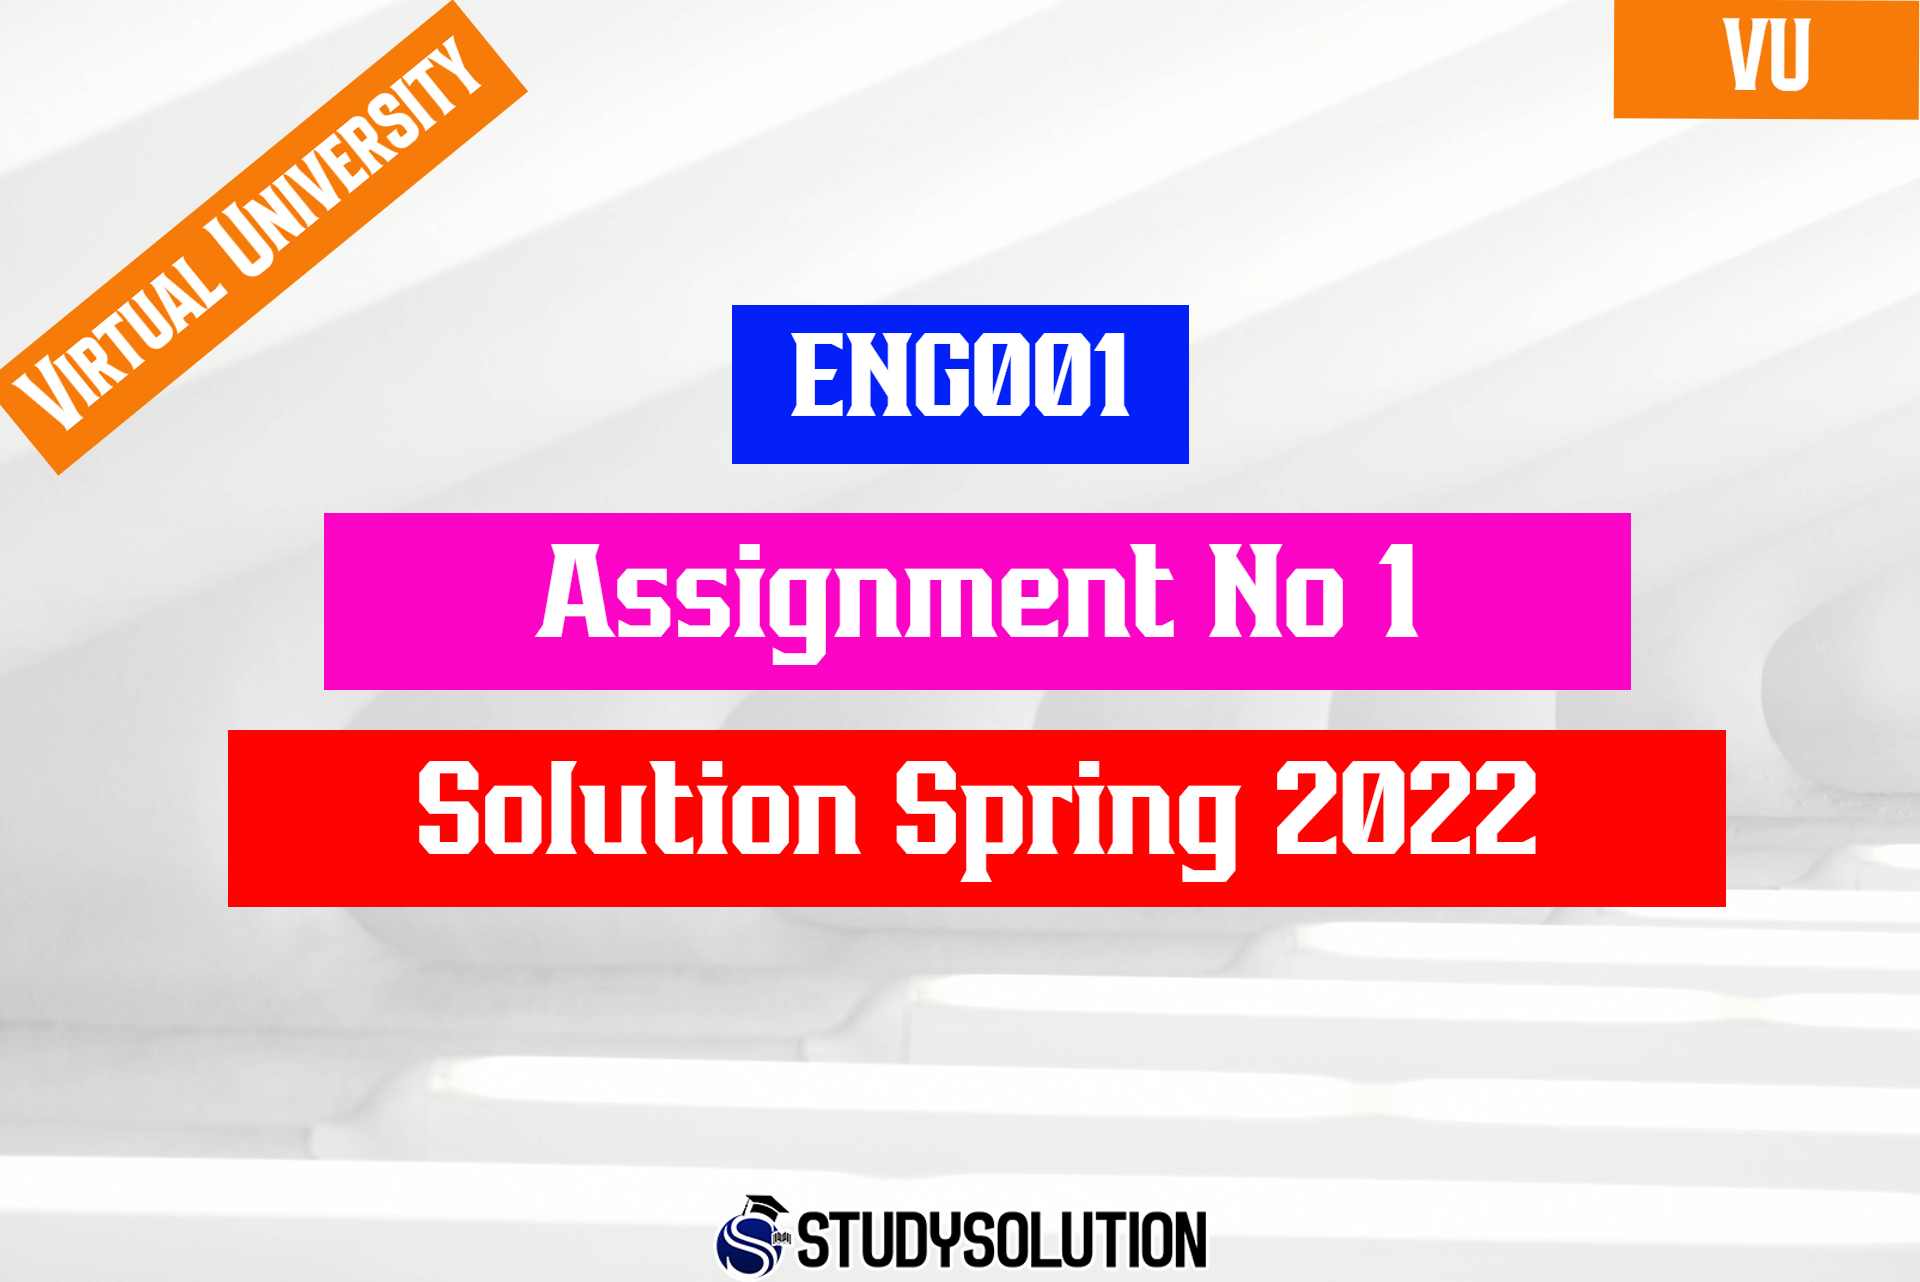 ENG001 Assignment No 1 Solution Spring 2022